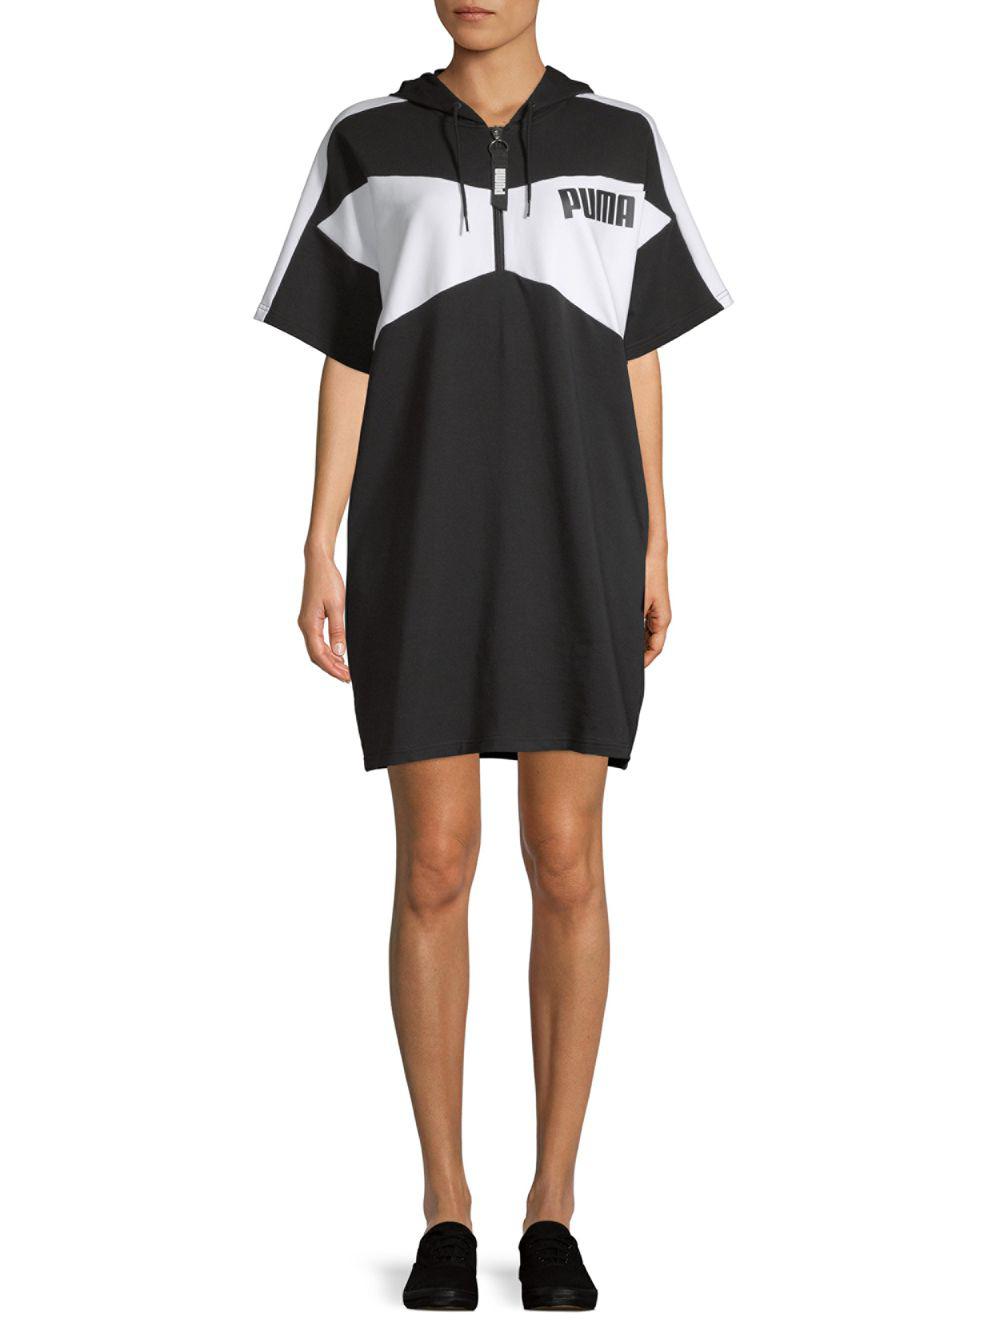 PUMA Cotton Archive Hooded Dress in 